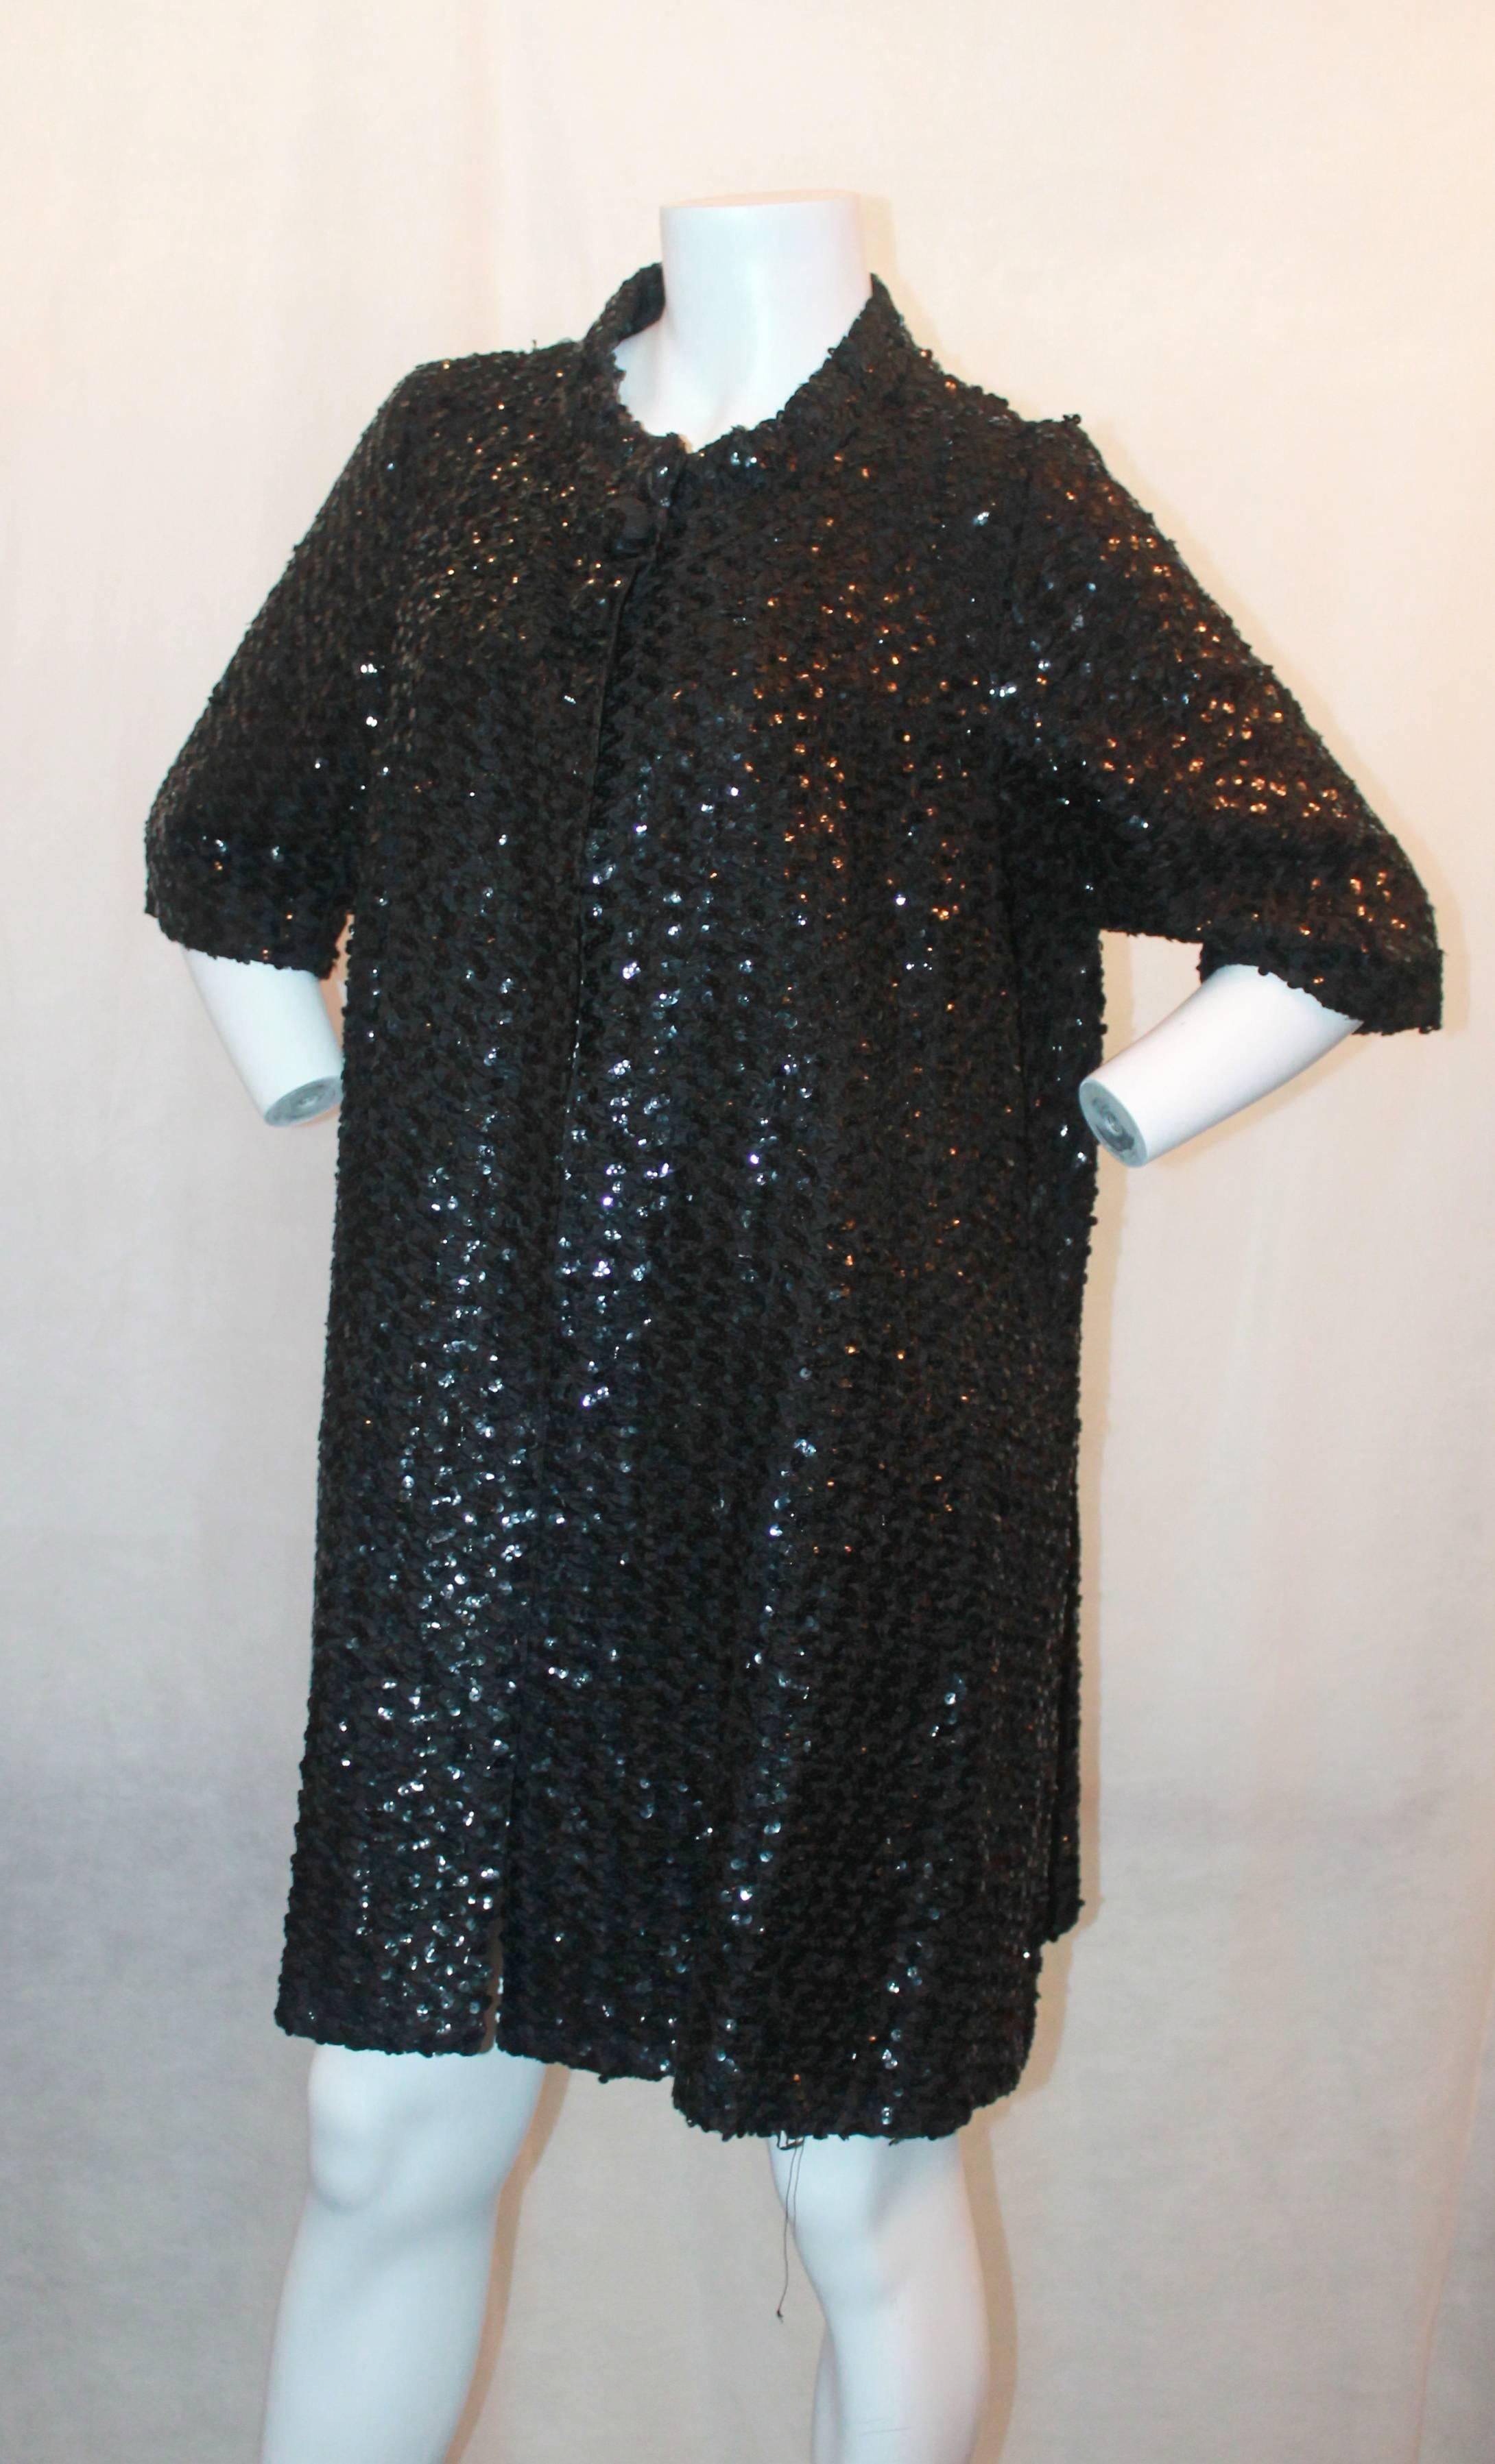 1960's Vintage Black Sequin 3/4 Coat - S. This piece is in excellent condition and is a swing coat with front snaps and 2 sequin ball buttons. It is a gorgeous piece and has a 3/4 sleeve.

Measurements:
Shoulder to Shoulder- 15